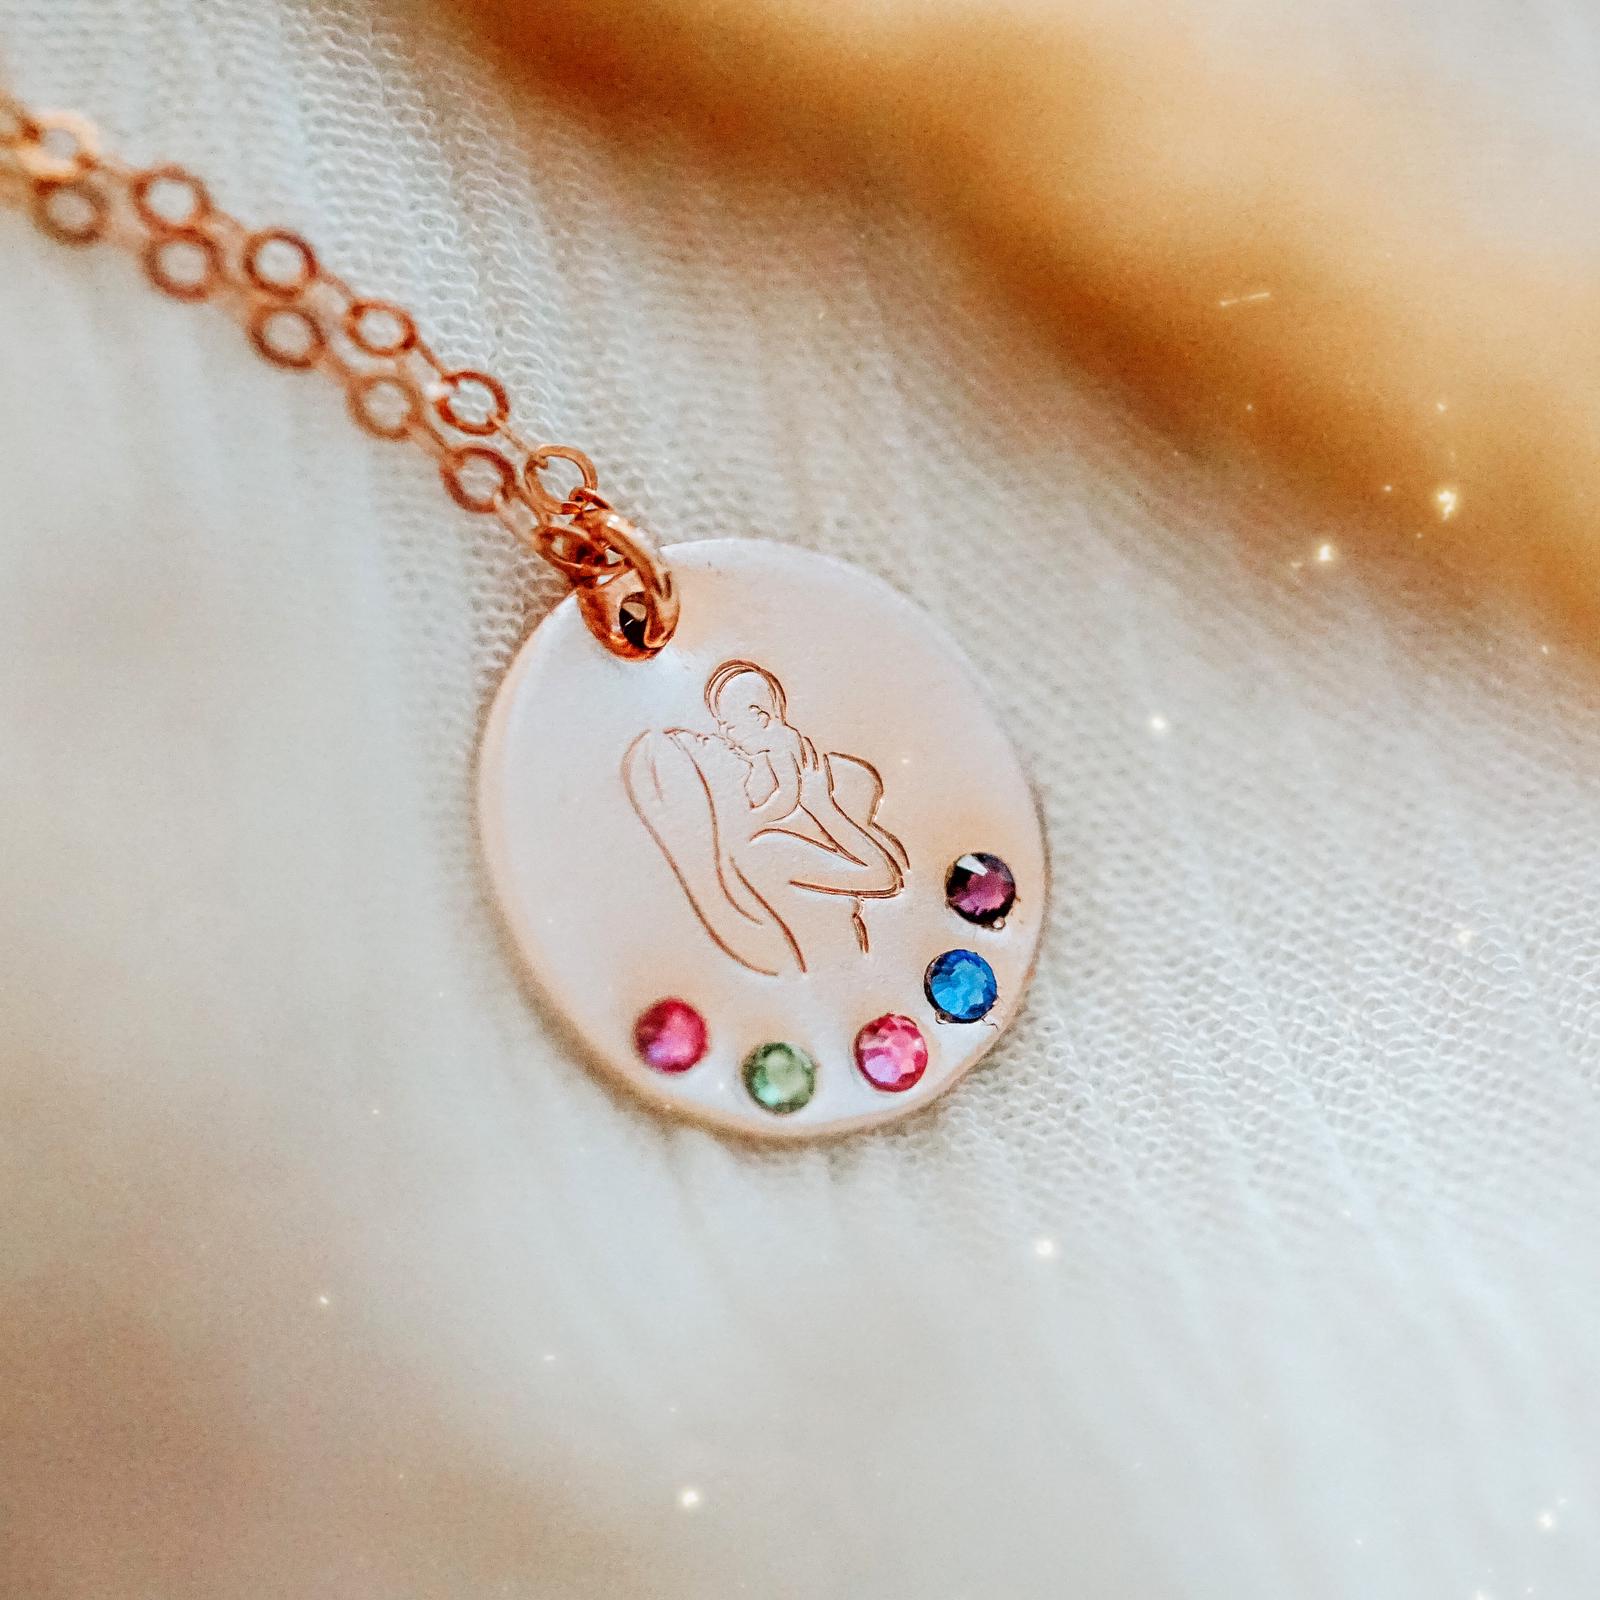 Woman and Child Birthstone Necklace - Large Disc